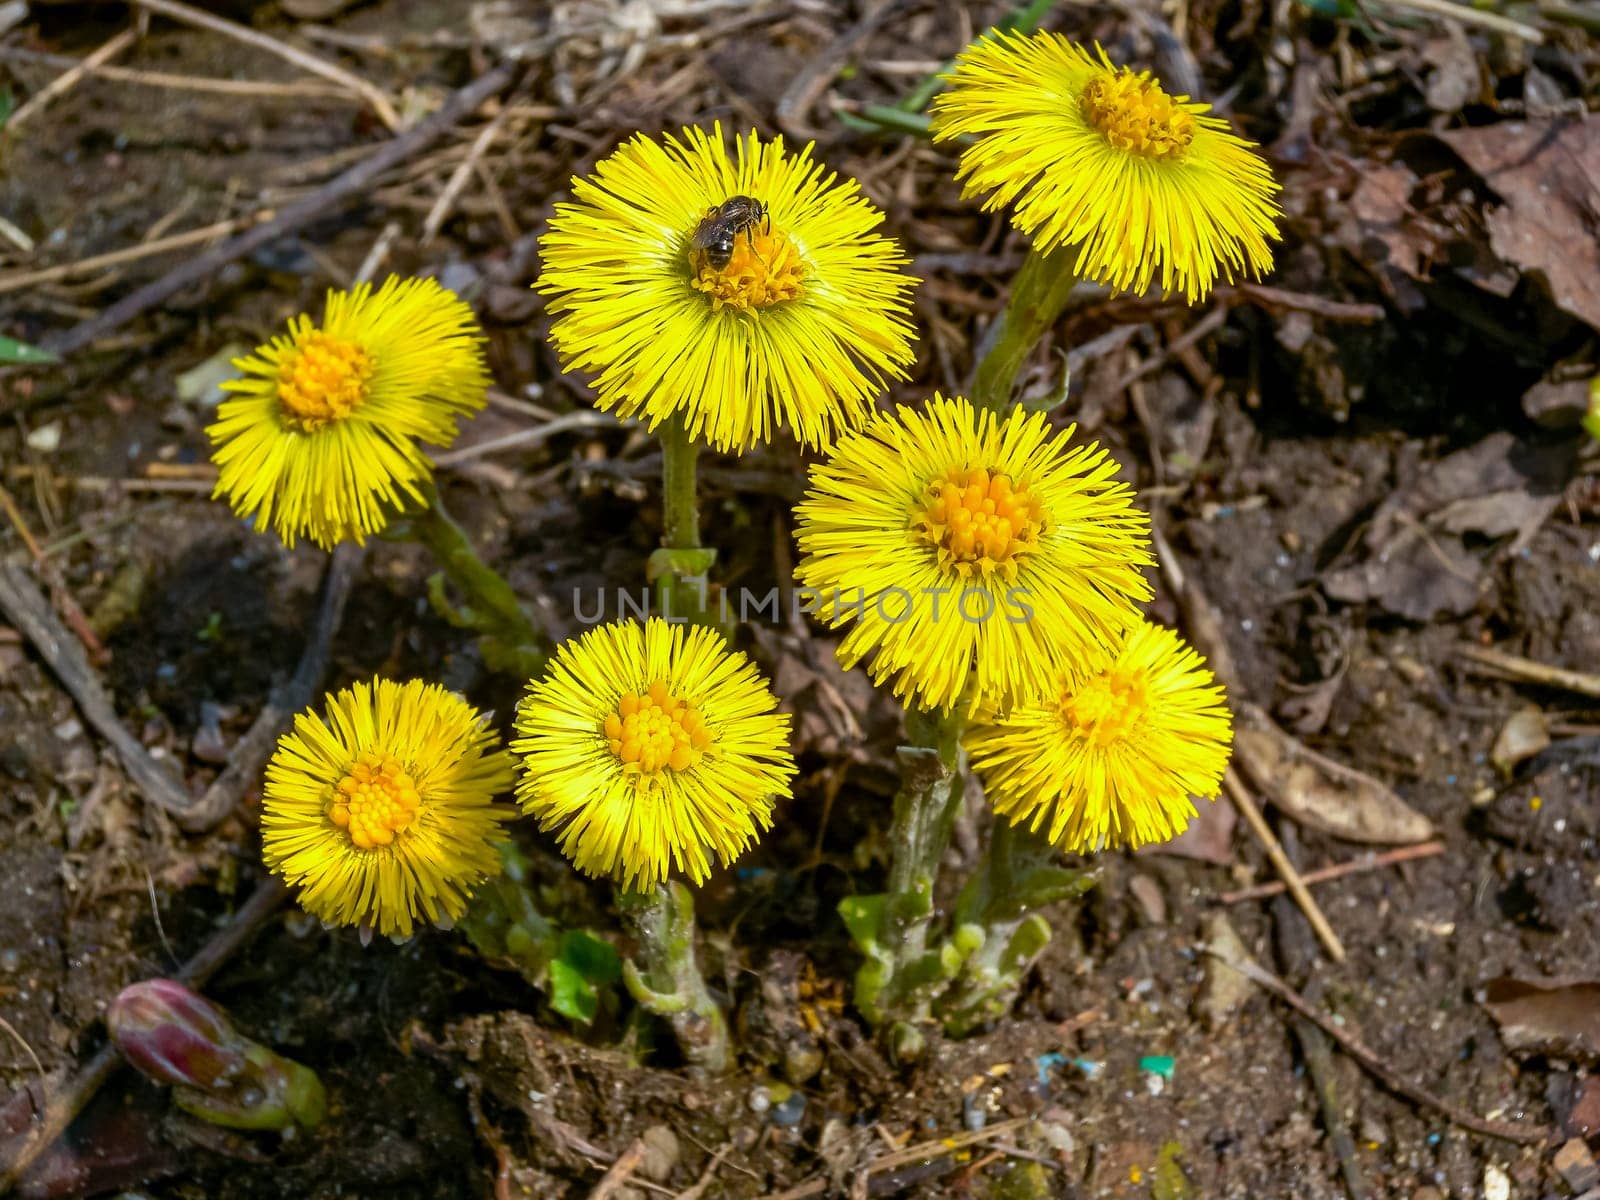 Coltsfoot (Tussilago farfara), a medicinal plant that blooms in early spring by Hydrobiolog